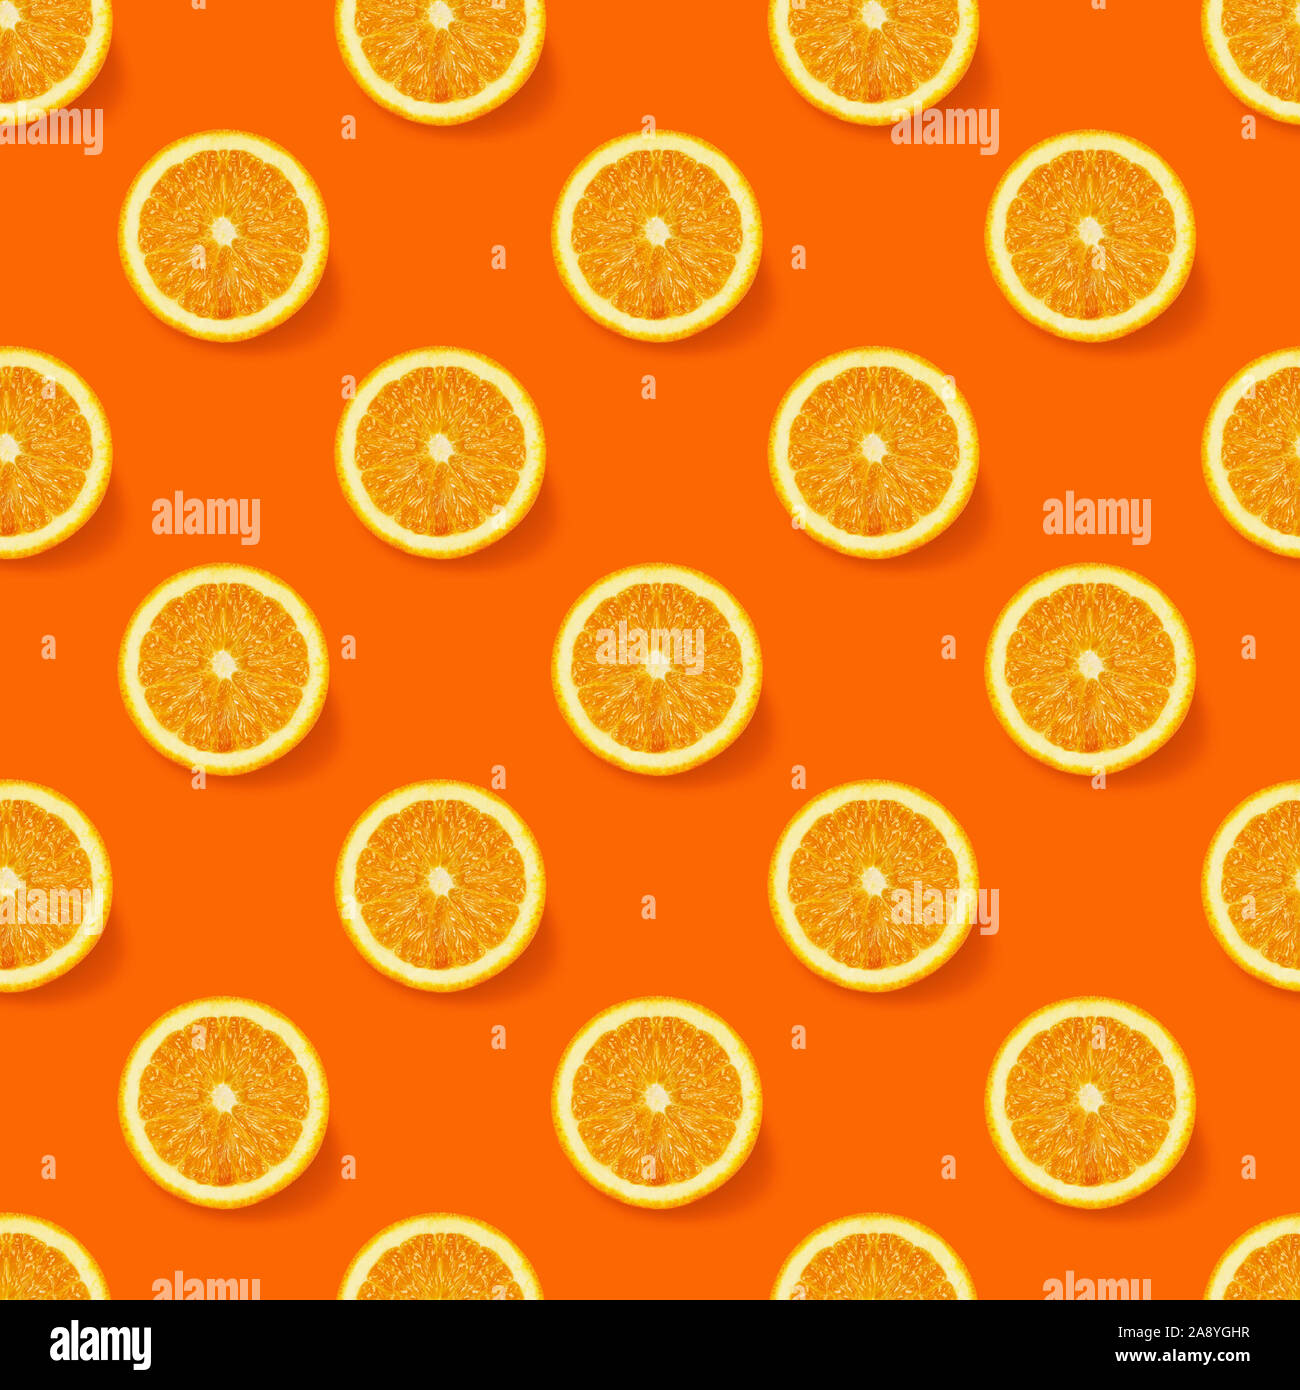 Seamless  pattern with oranges slices on orange background. Flat lay, top view. Creative  concept. Isometric view. Stock Photo